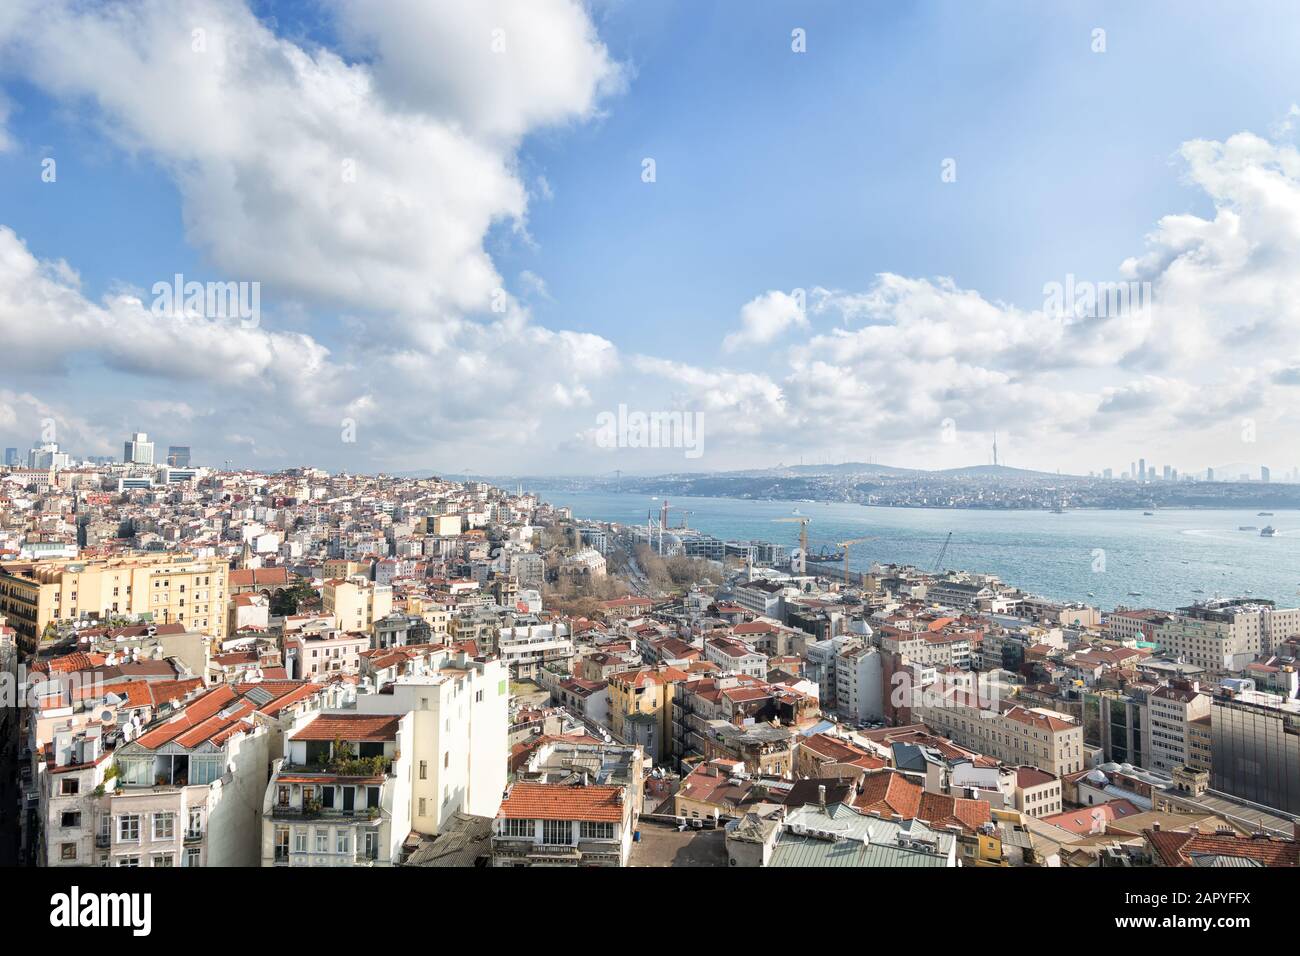 Panoramic view over the city and Bosporus from Galata tower in Istanbul, Turkey Stock Photo